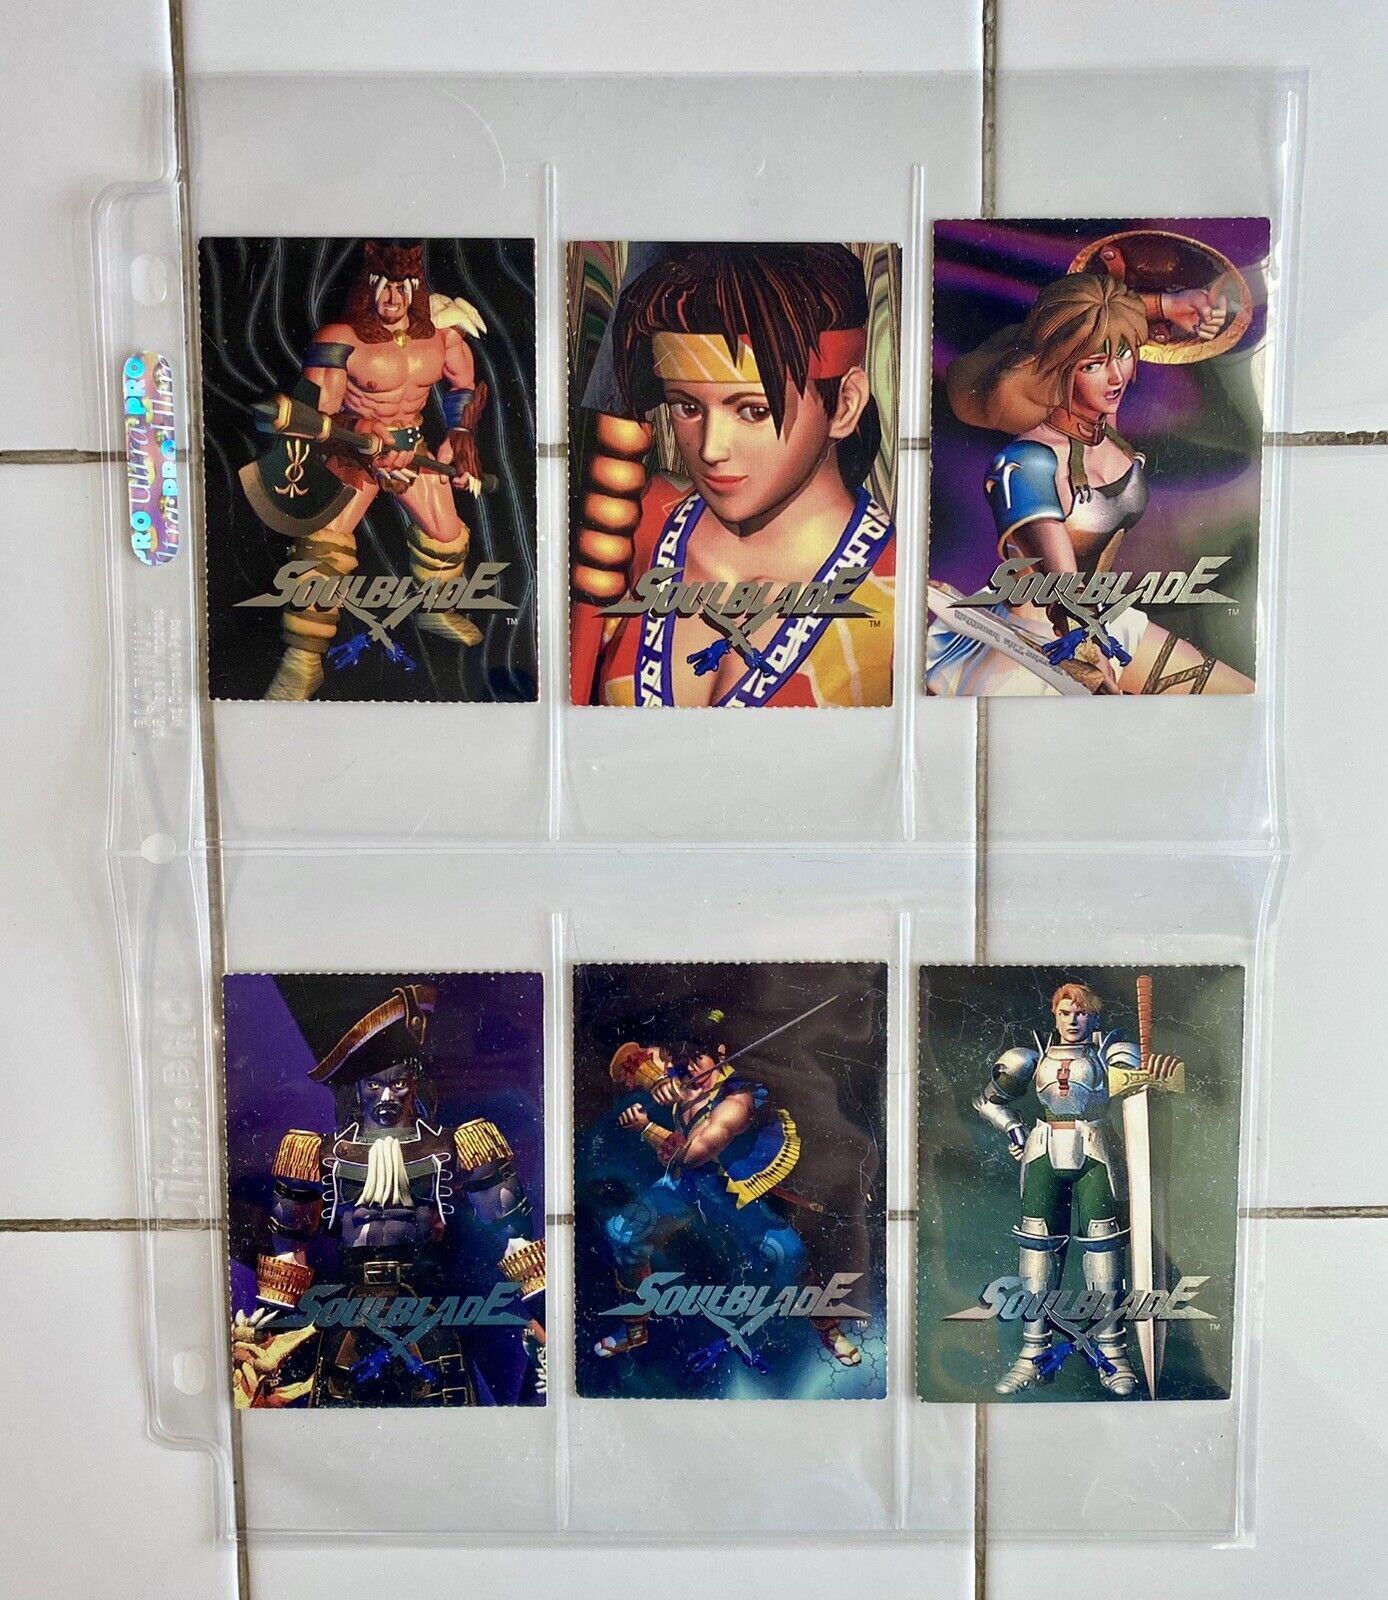 SOULBLADE-Promo Character Cards (Lot Of 6) 1995/1996 Namco Playstation